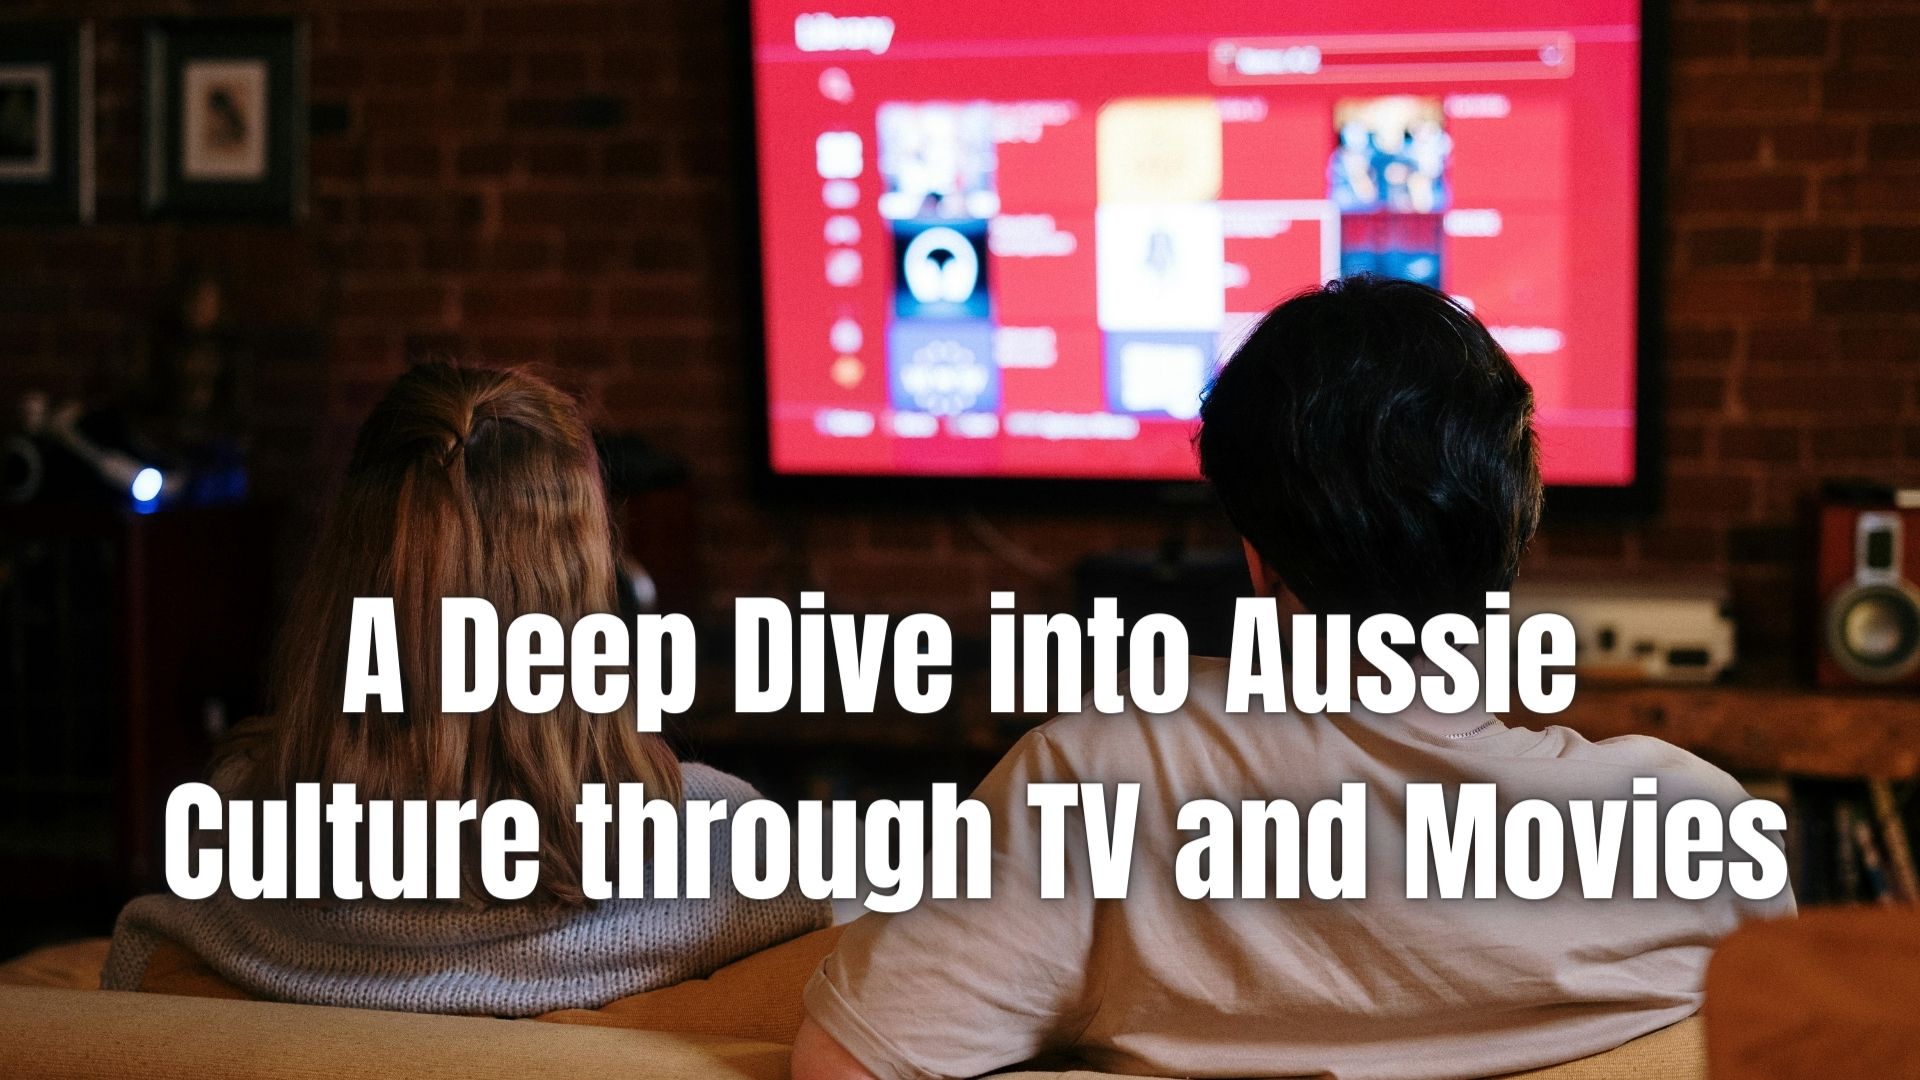 Binge-watch Your Way to Aussie Culture! Our top picks for TV shows & movies that'll entertain you & immerse you in Australian life.